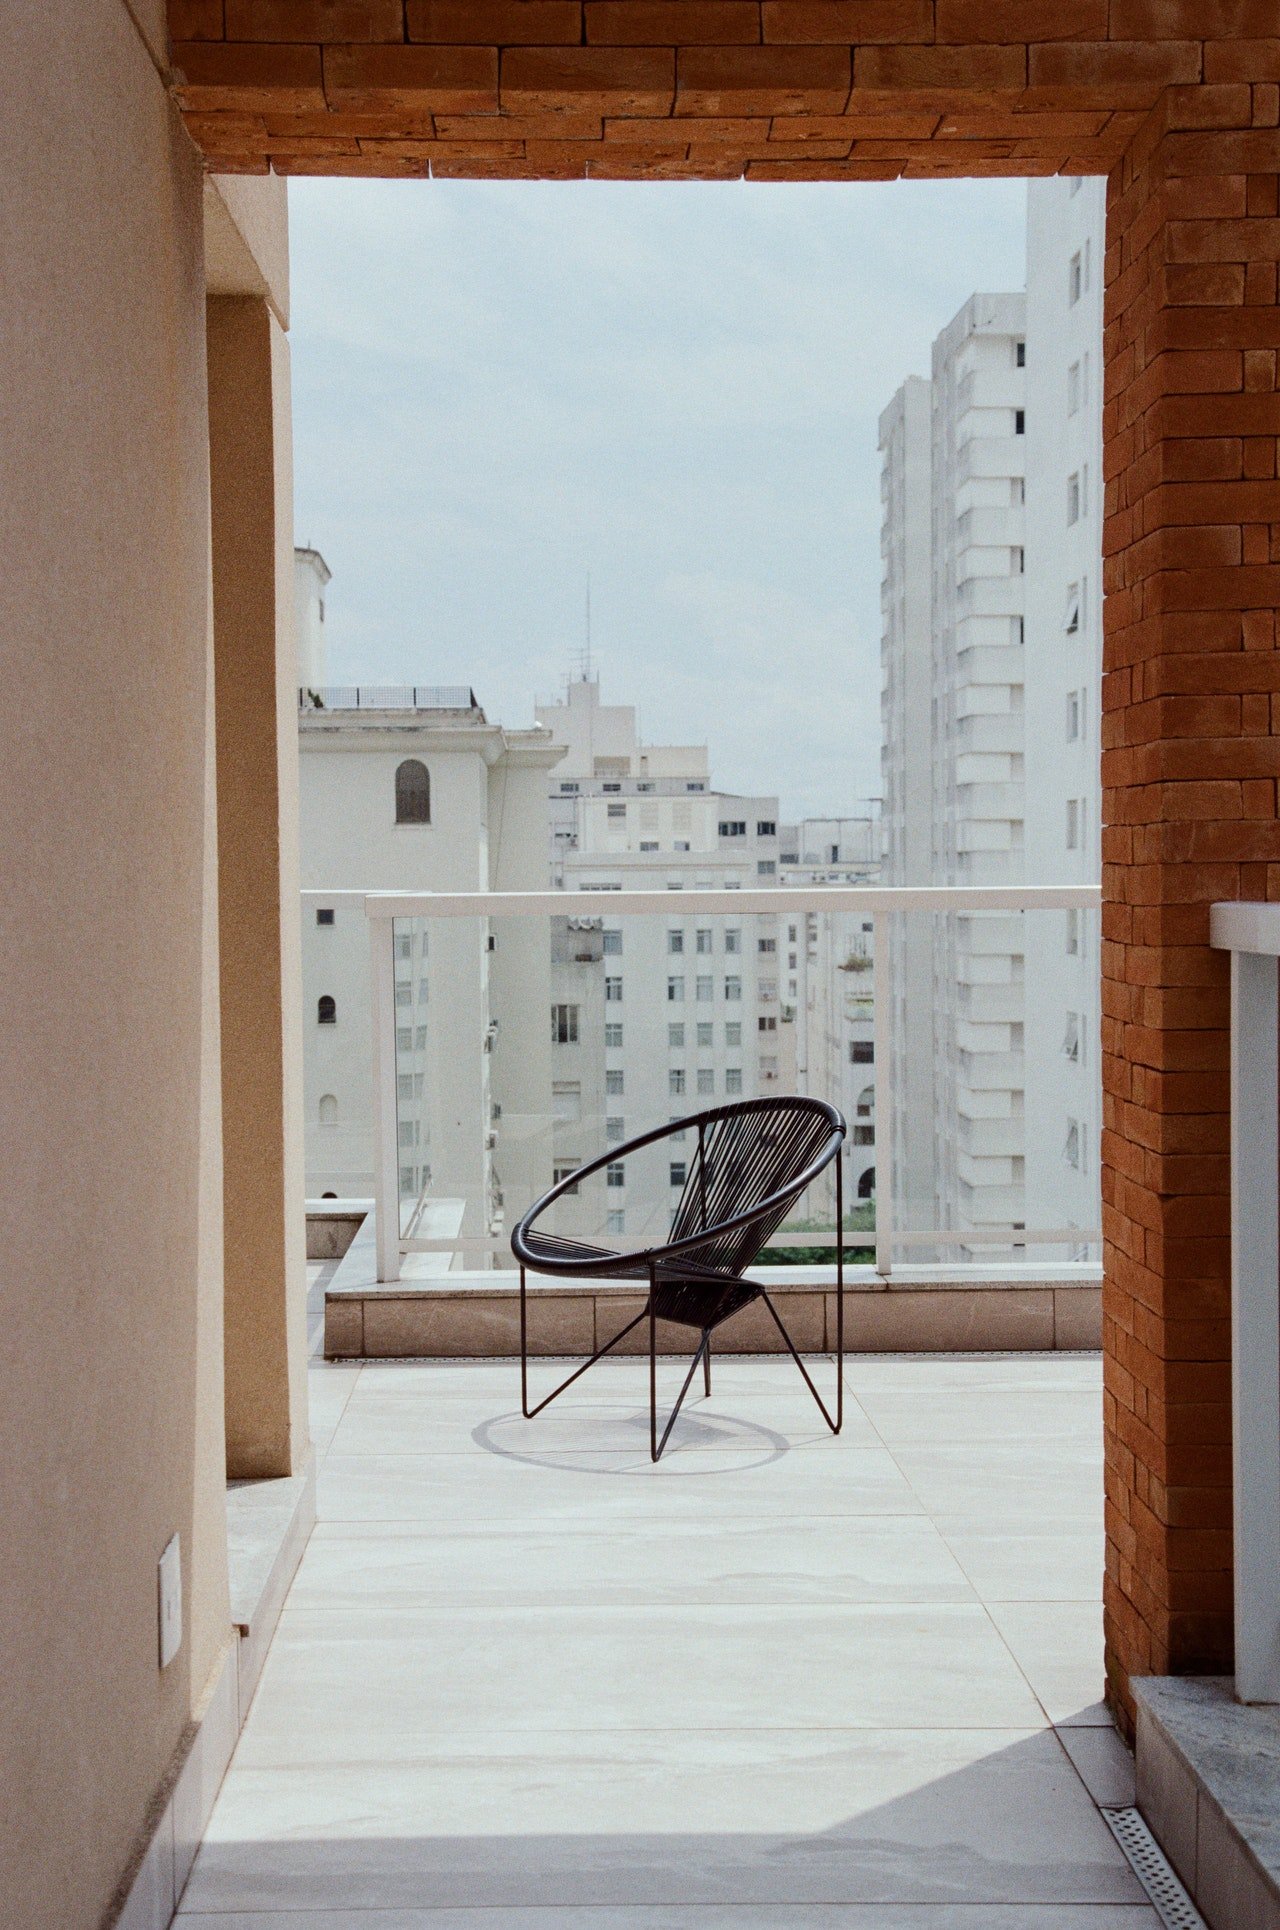 She sat on her balcony every morning. | Source: Pexels